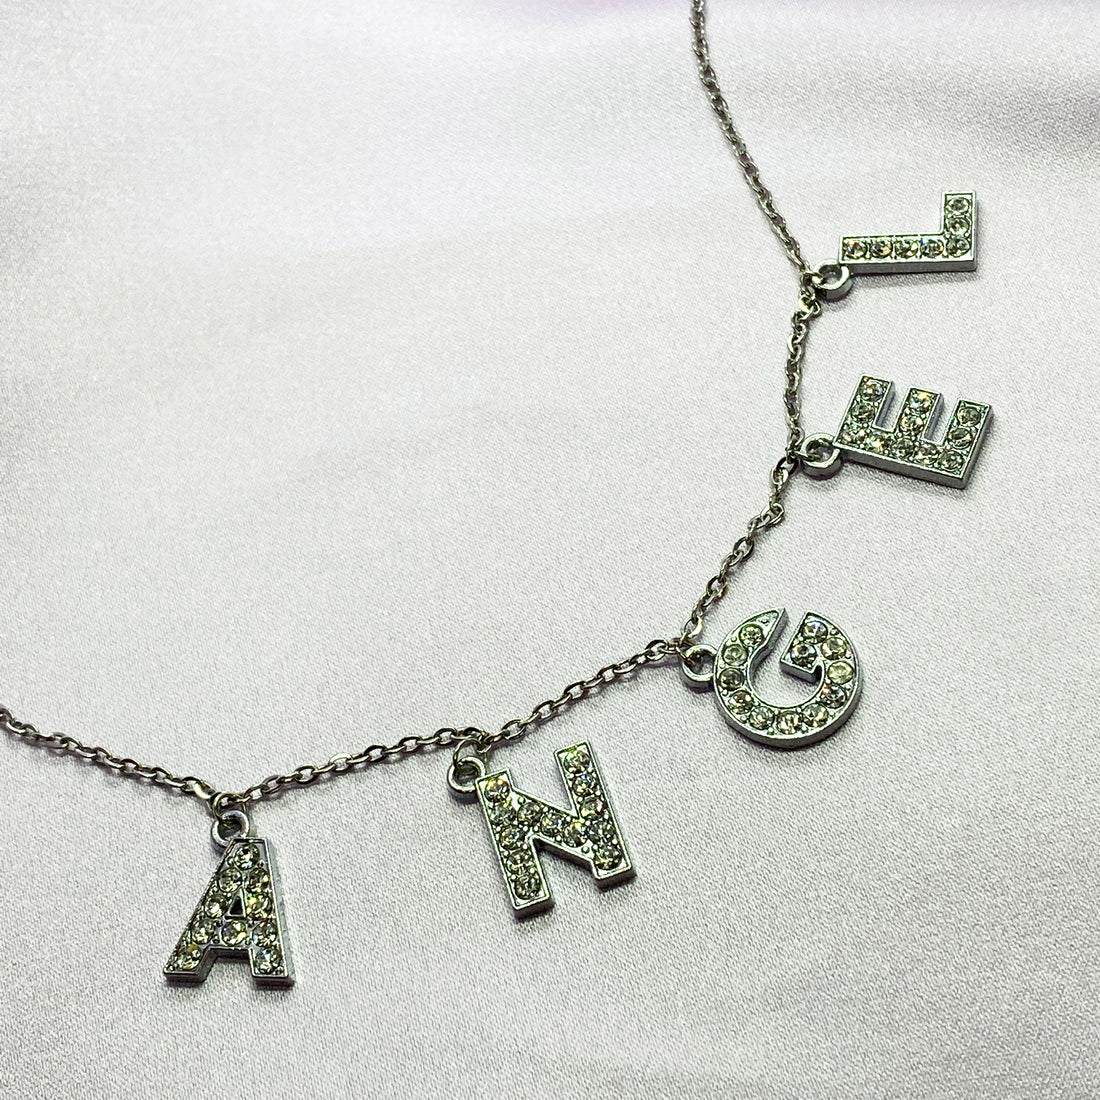 Angel Charm Necklace - Darlings Jewelry